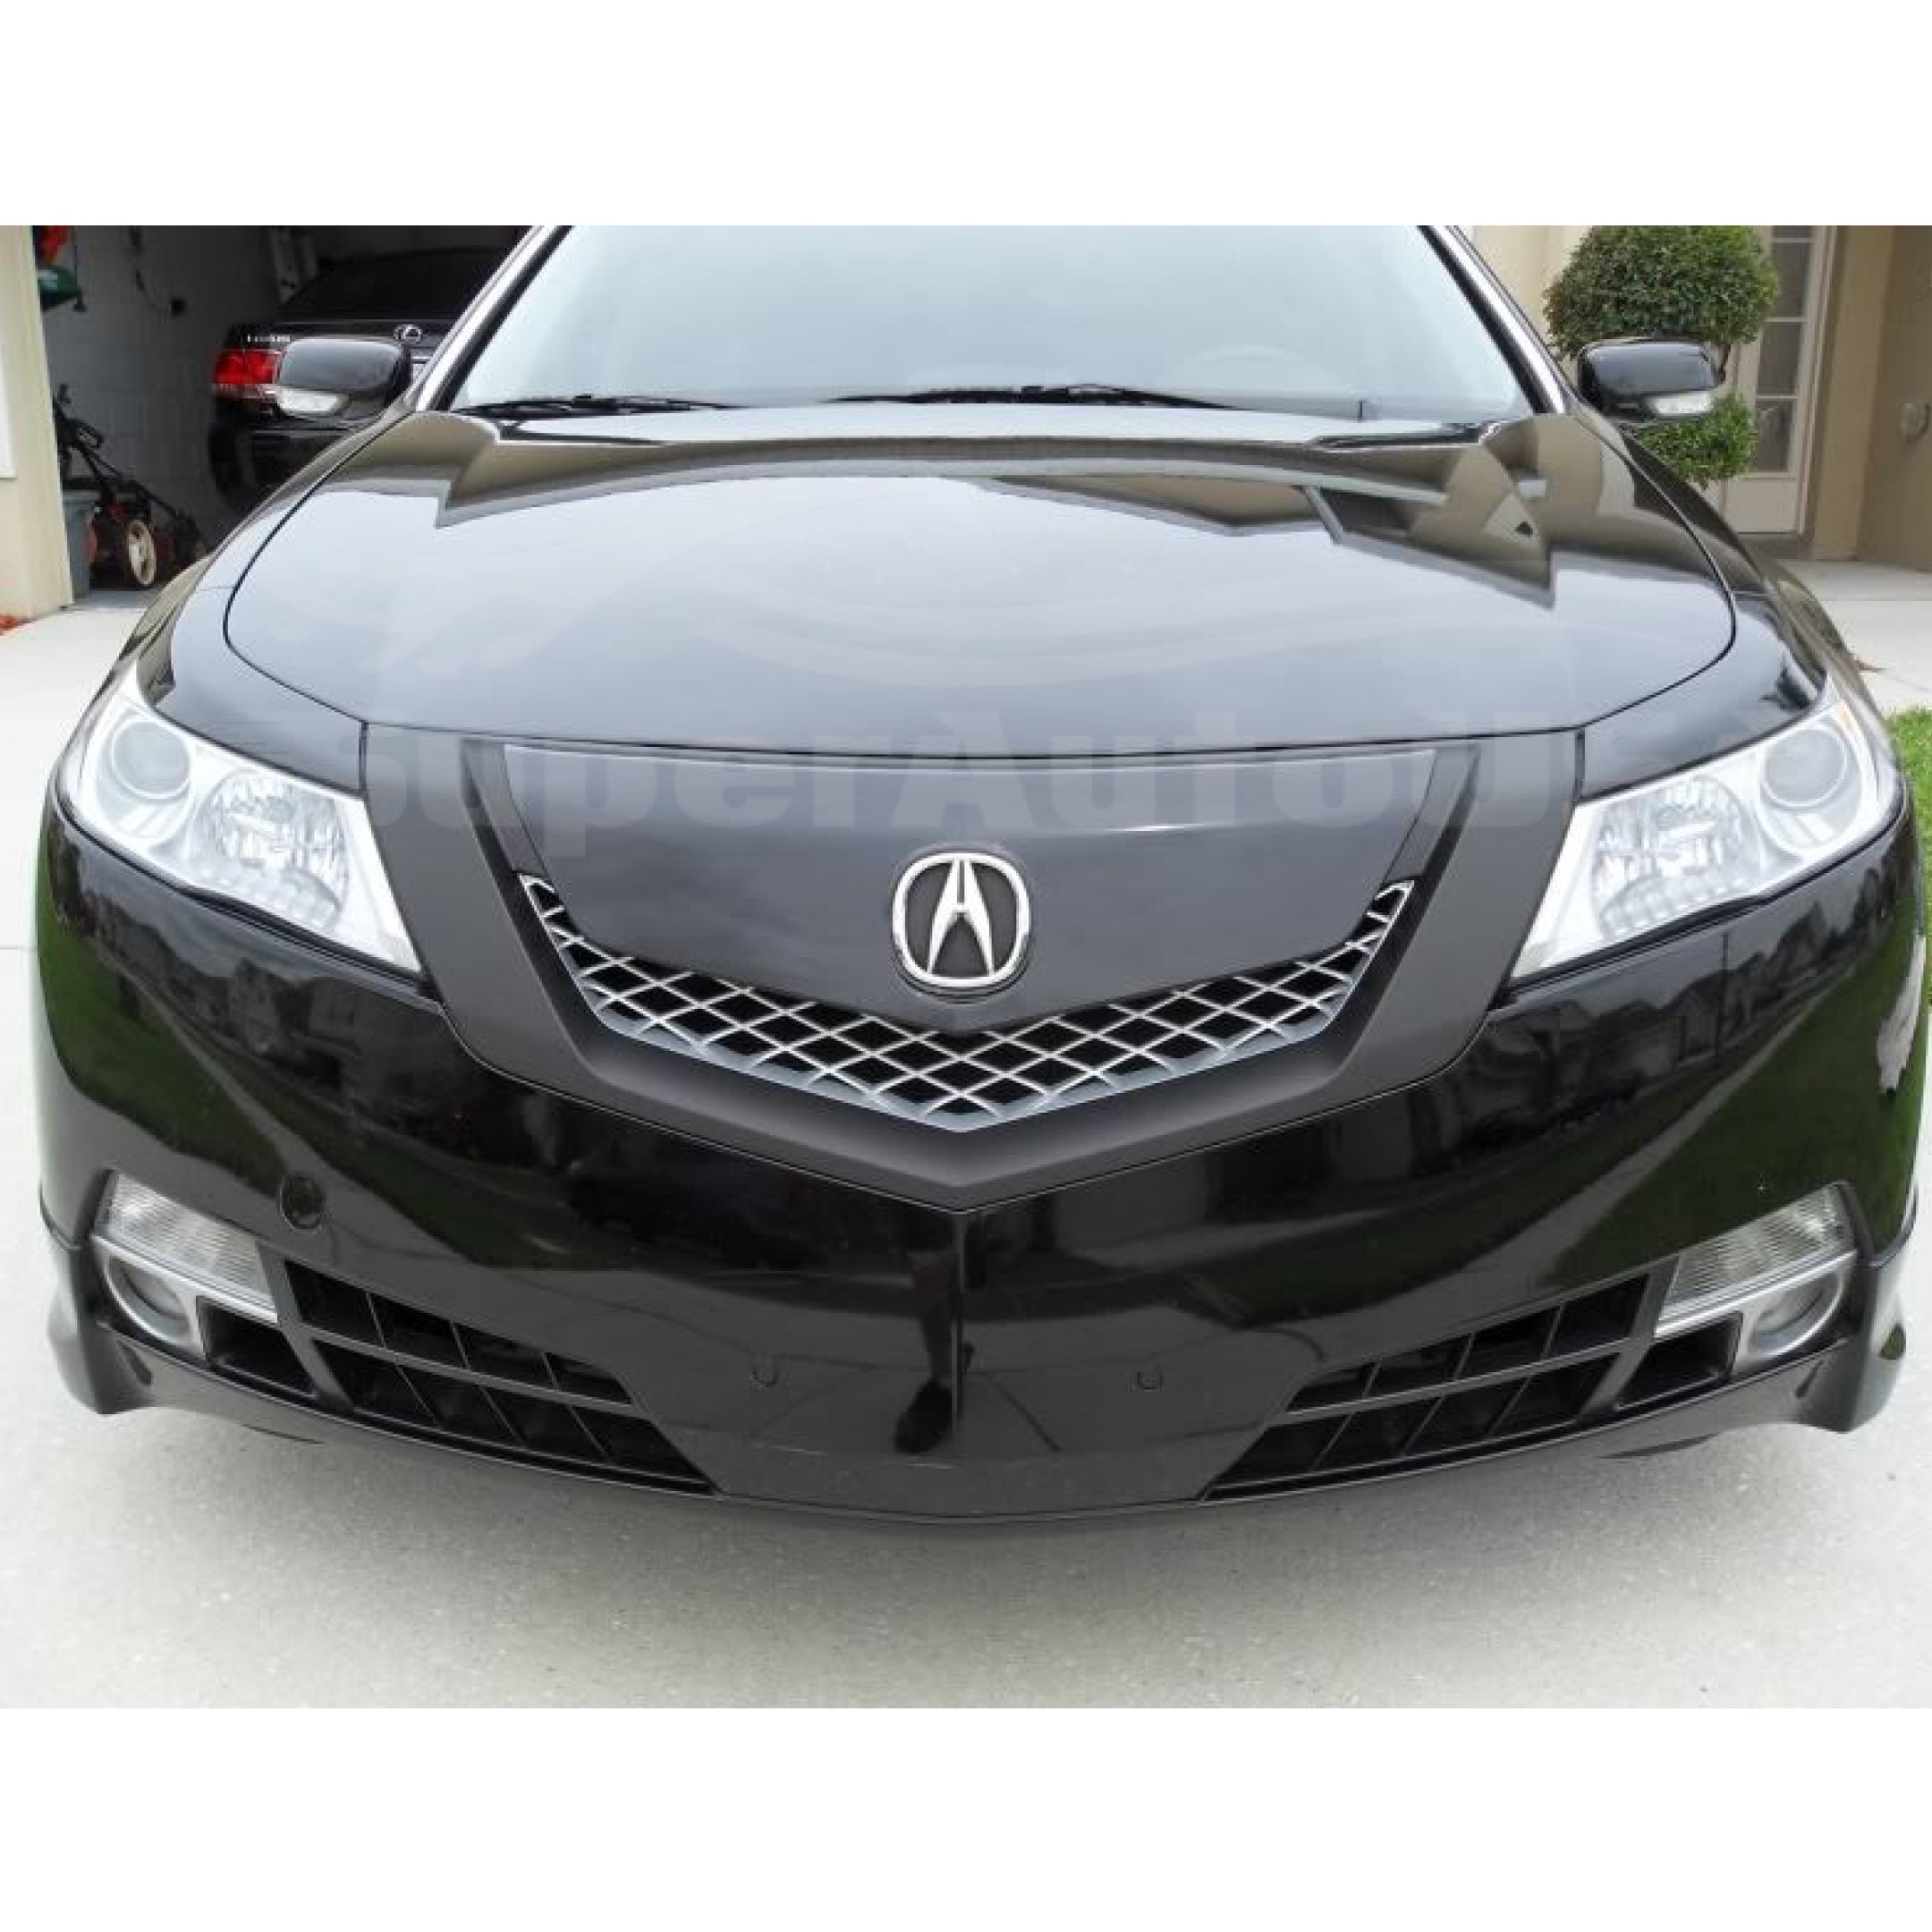 For 2009-2014 Acura TSX Front Bumper Upper Grille Assembly Grill (Gloss Black)